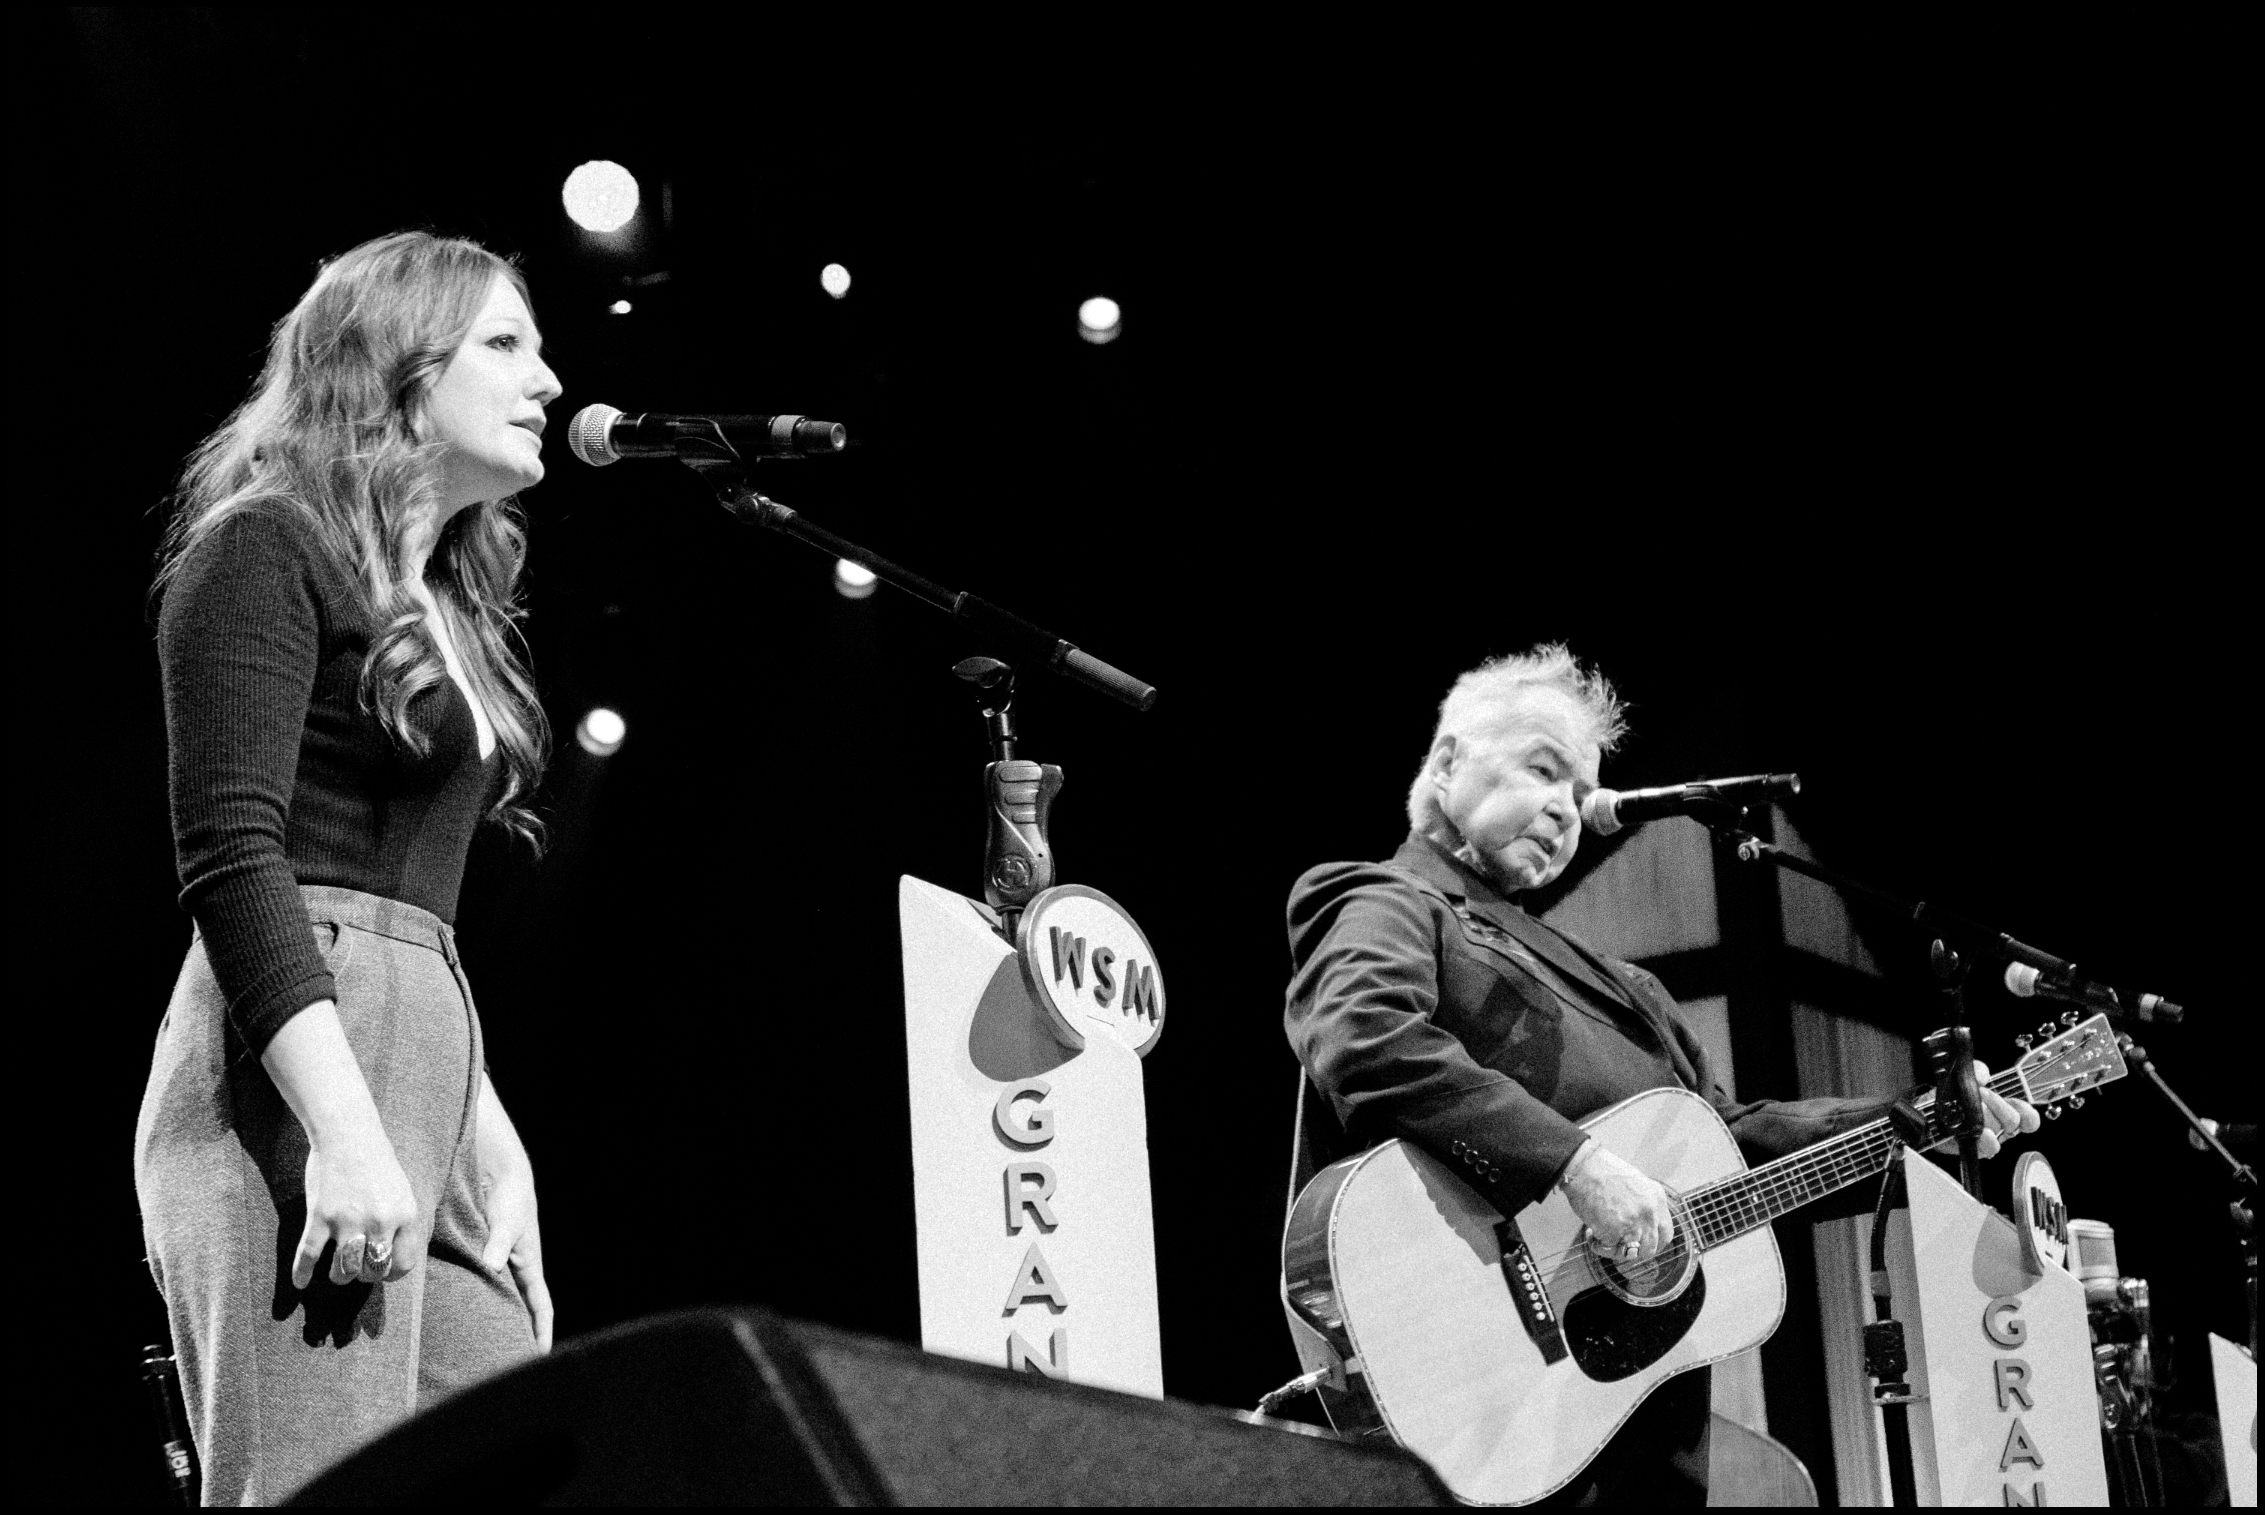 Kelsey Waldon and John Prine sing together at the Grand Ole Opry